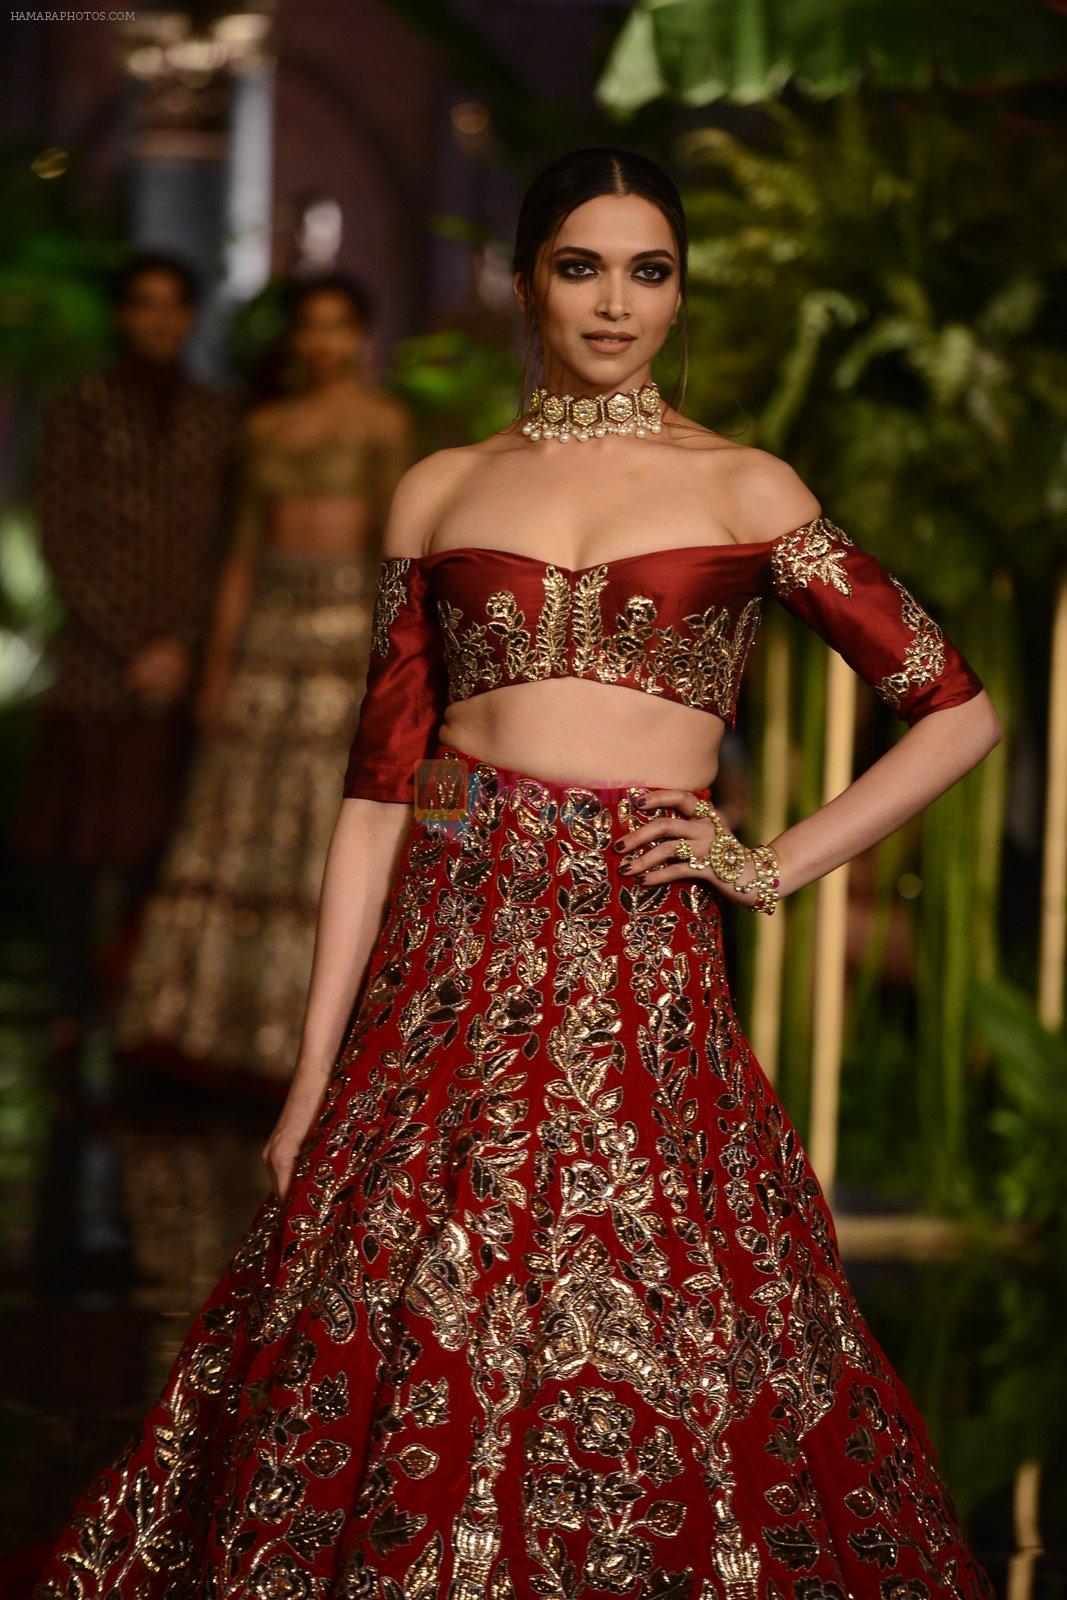 Deepika Padukone during the FDCI India Couture Week 2016 at the Taj Palace on July 21, 2016